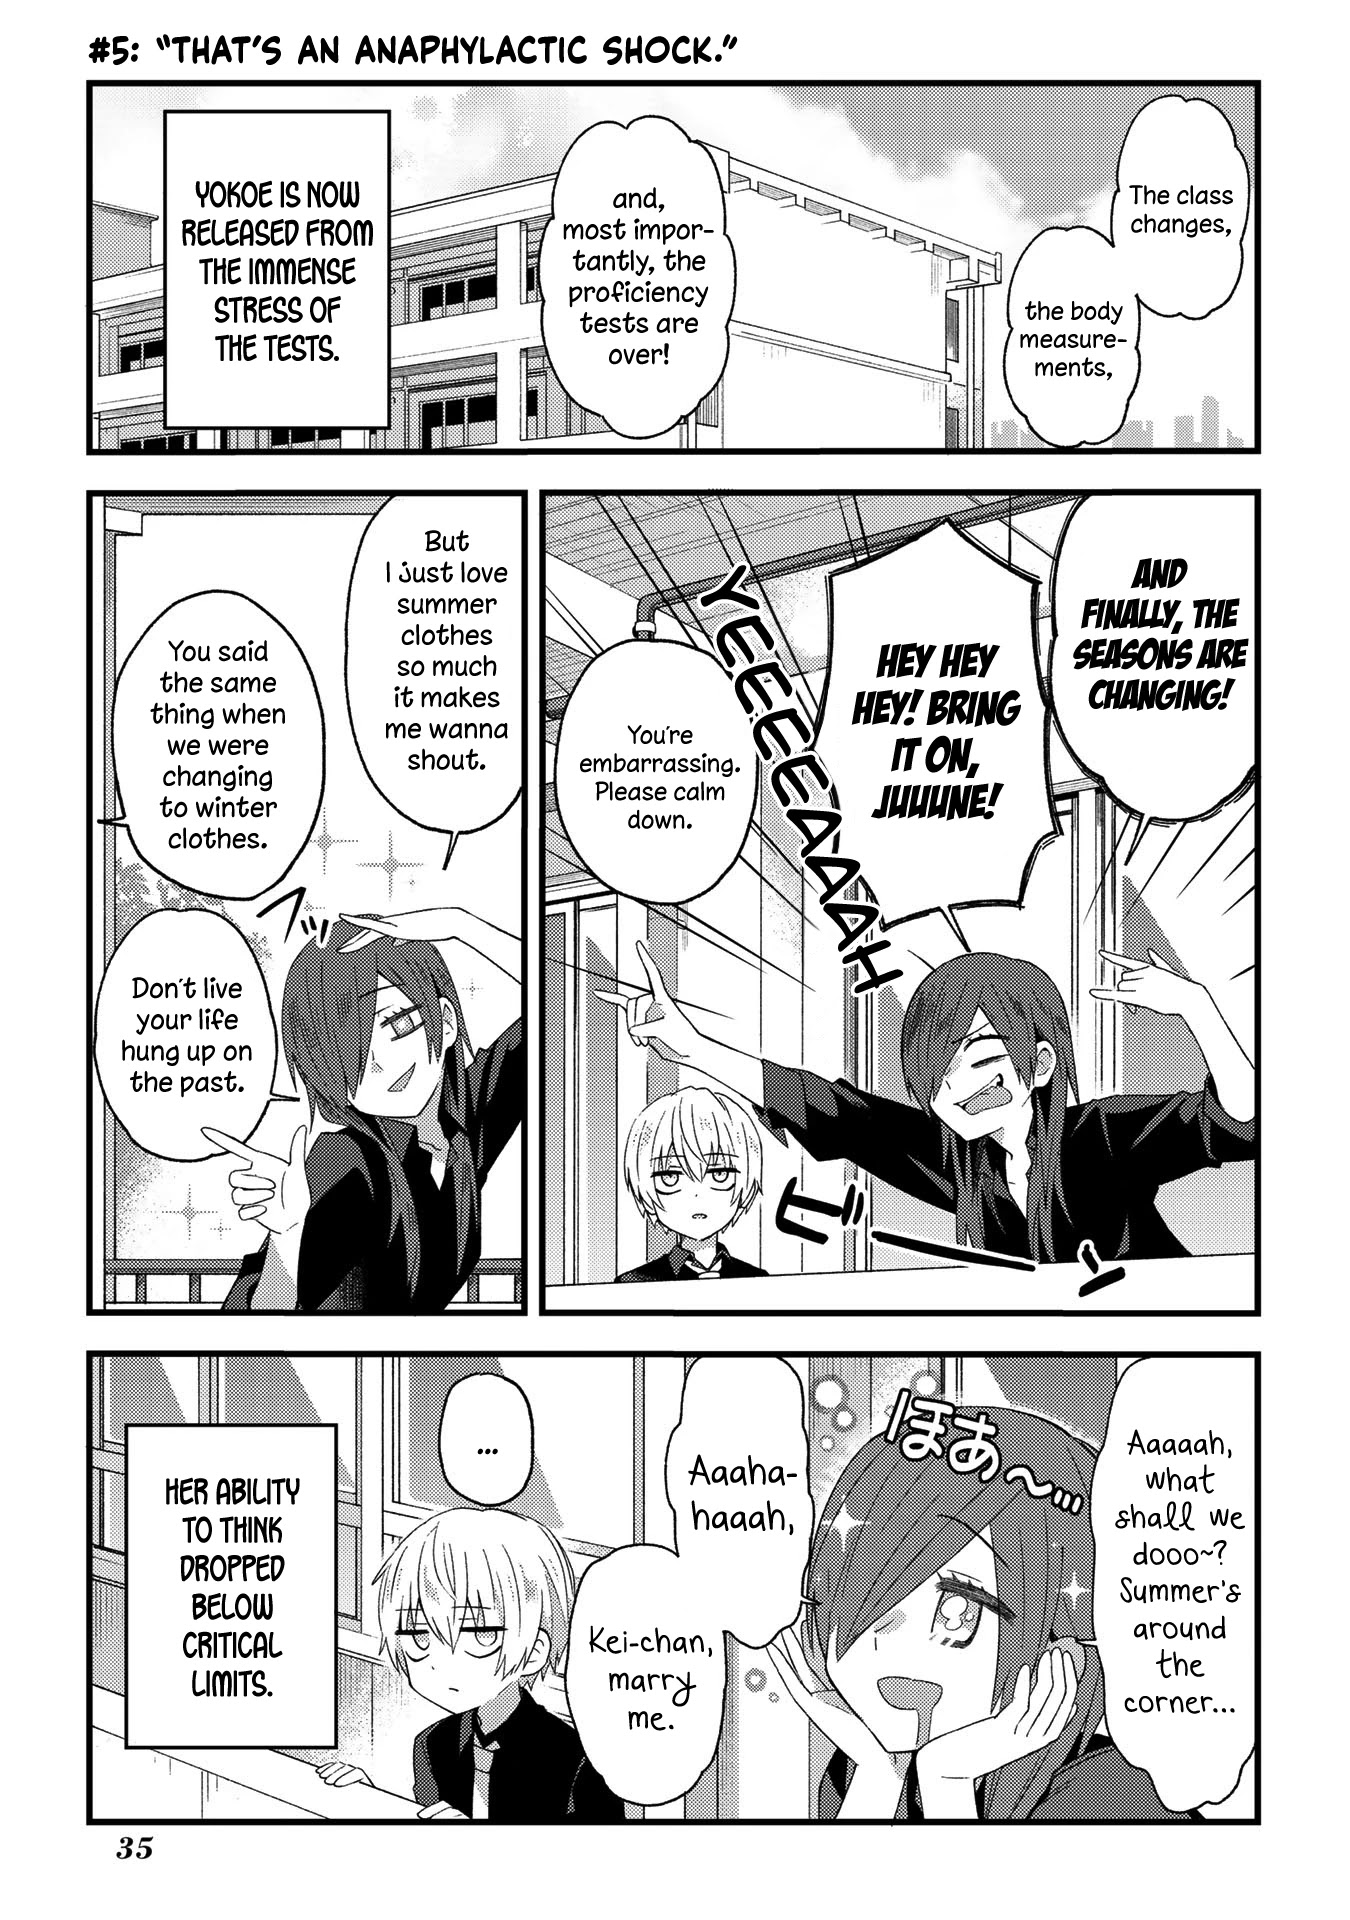 School Zone (Ningiyau) Chapter 5: That's An Anaphylactic Shock. - Picture 1